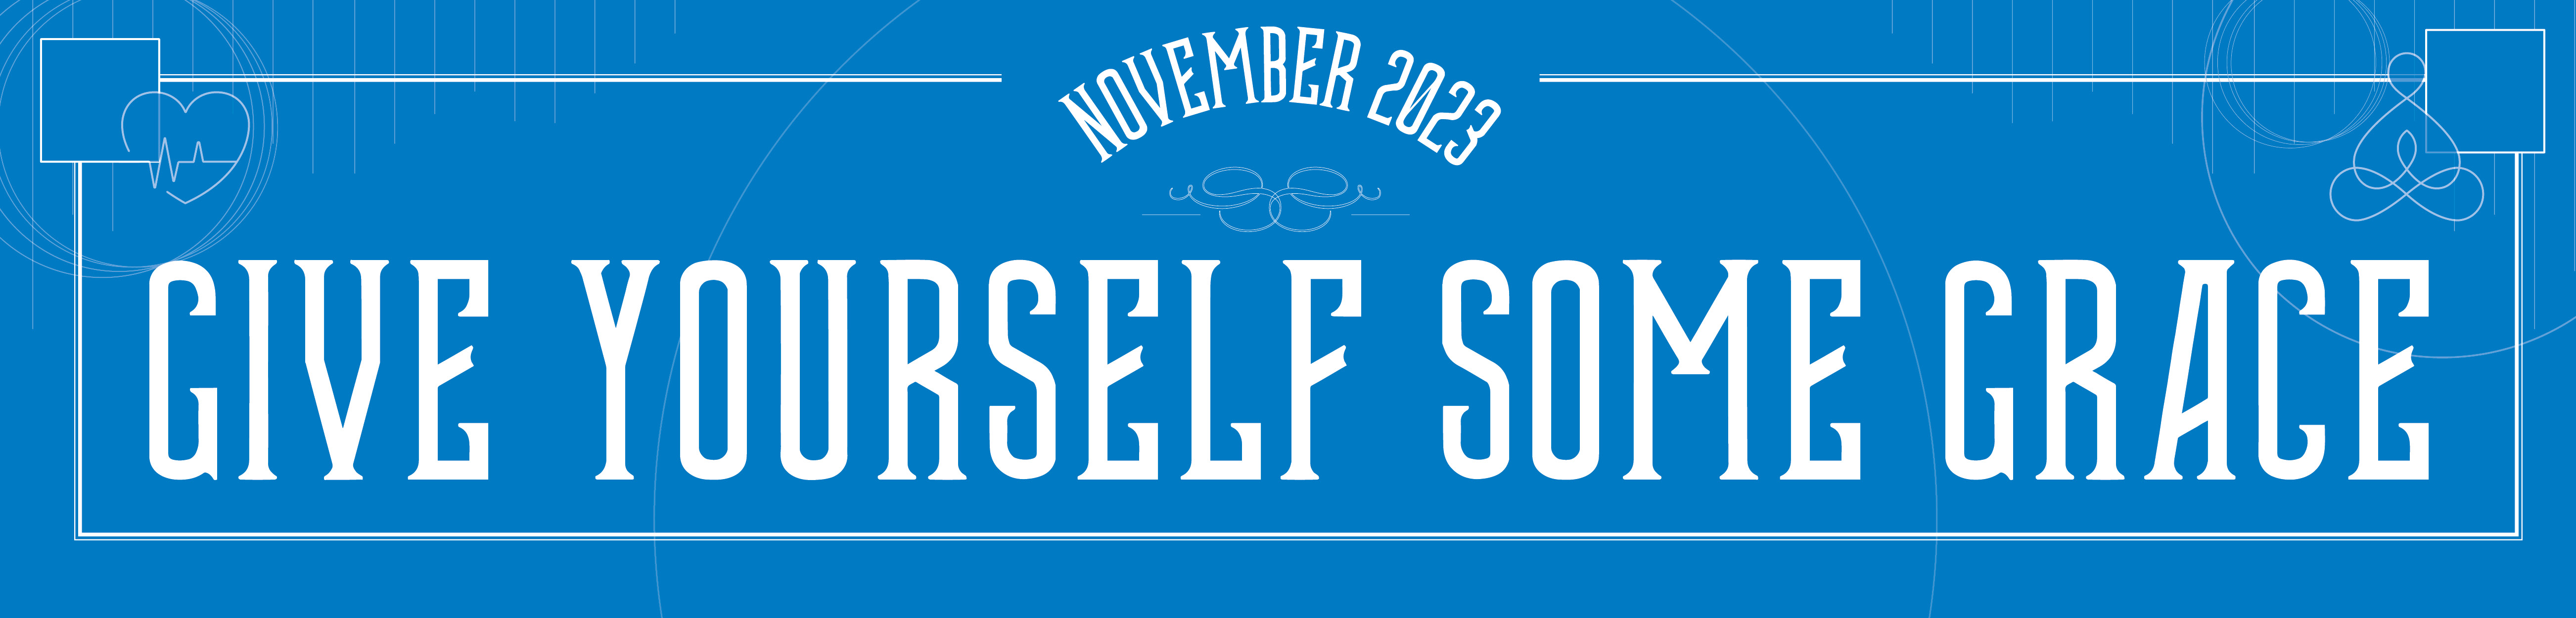 November 2023 - Give Yourself Some Grace